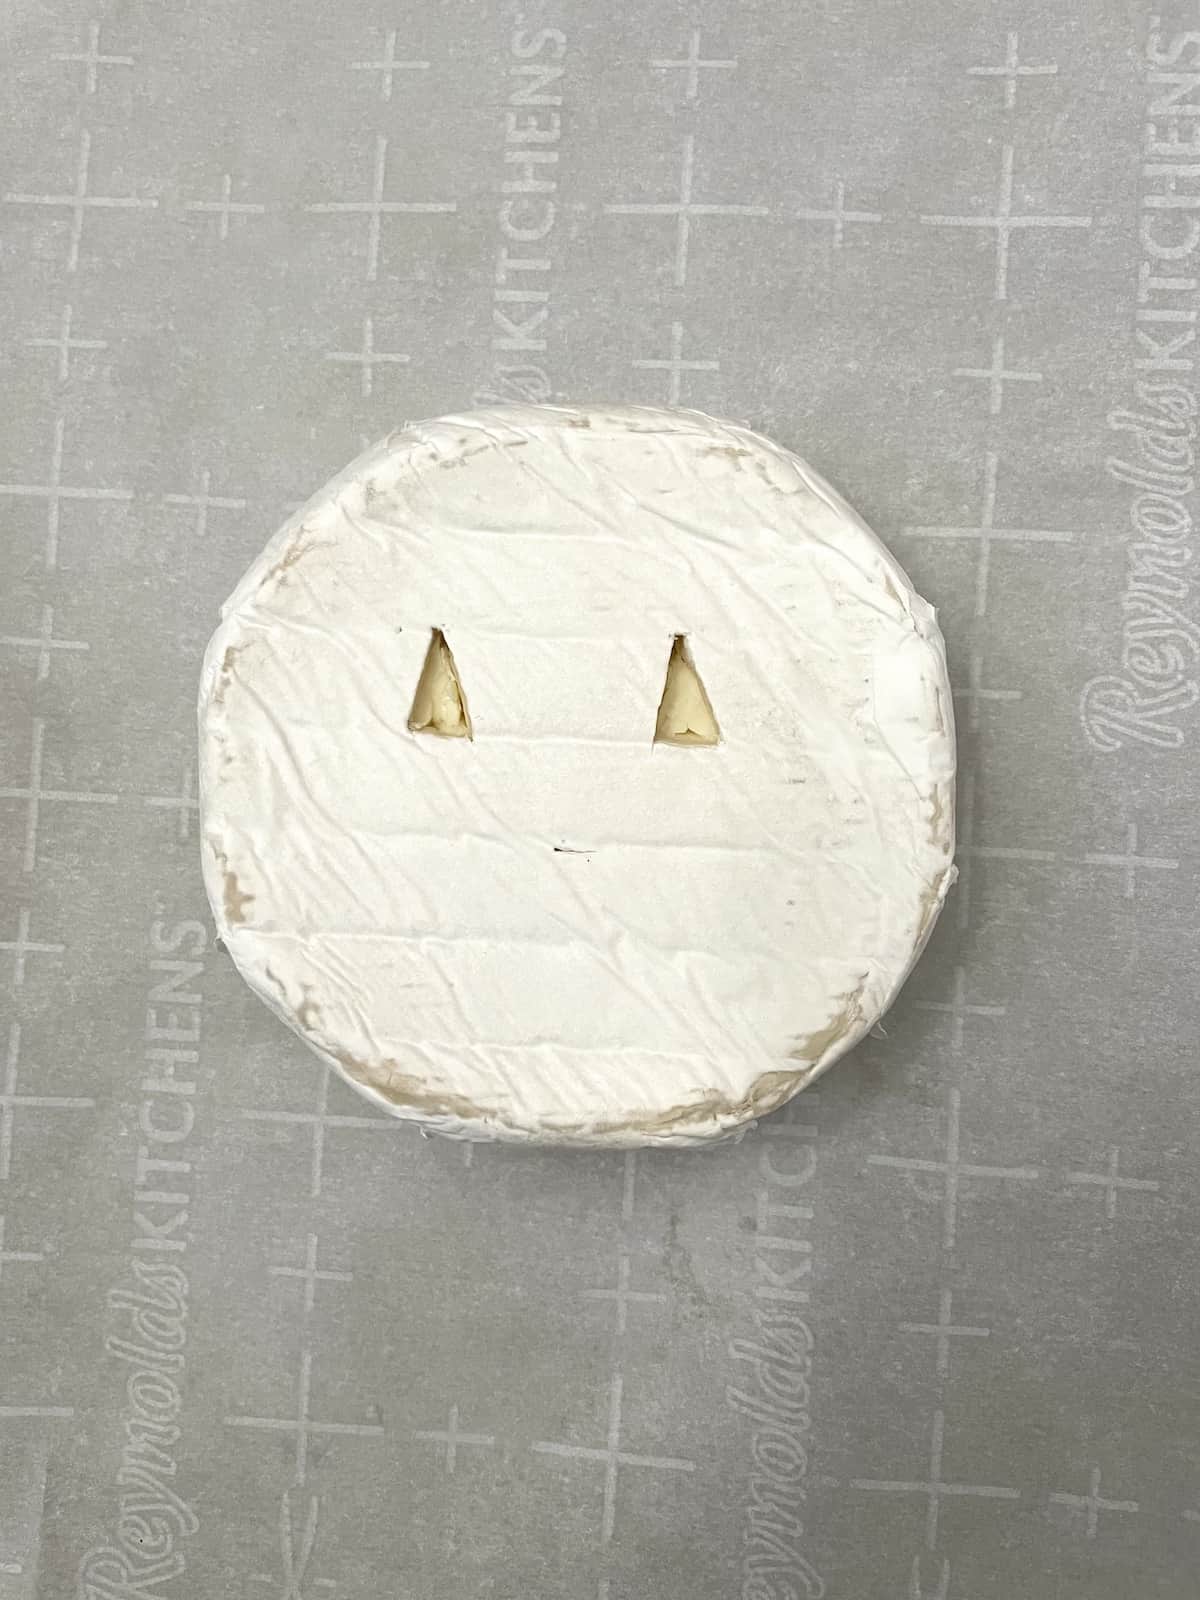 Brie with triangle eyes carved out.